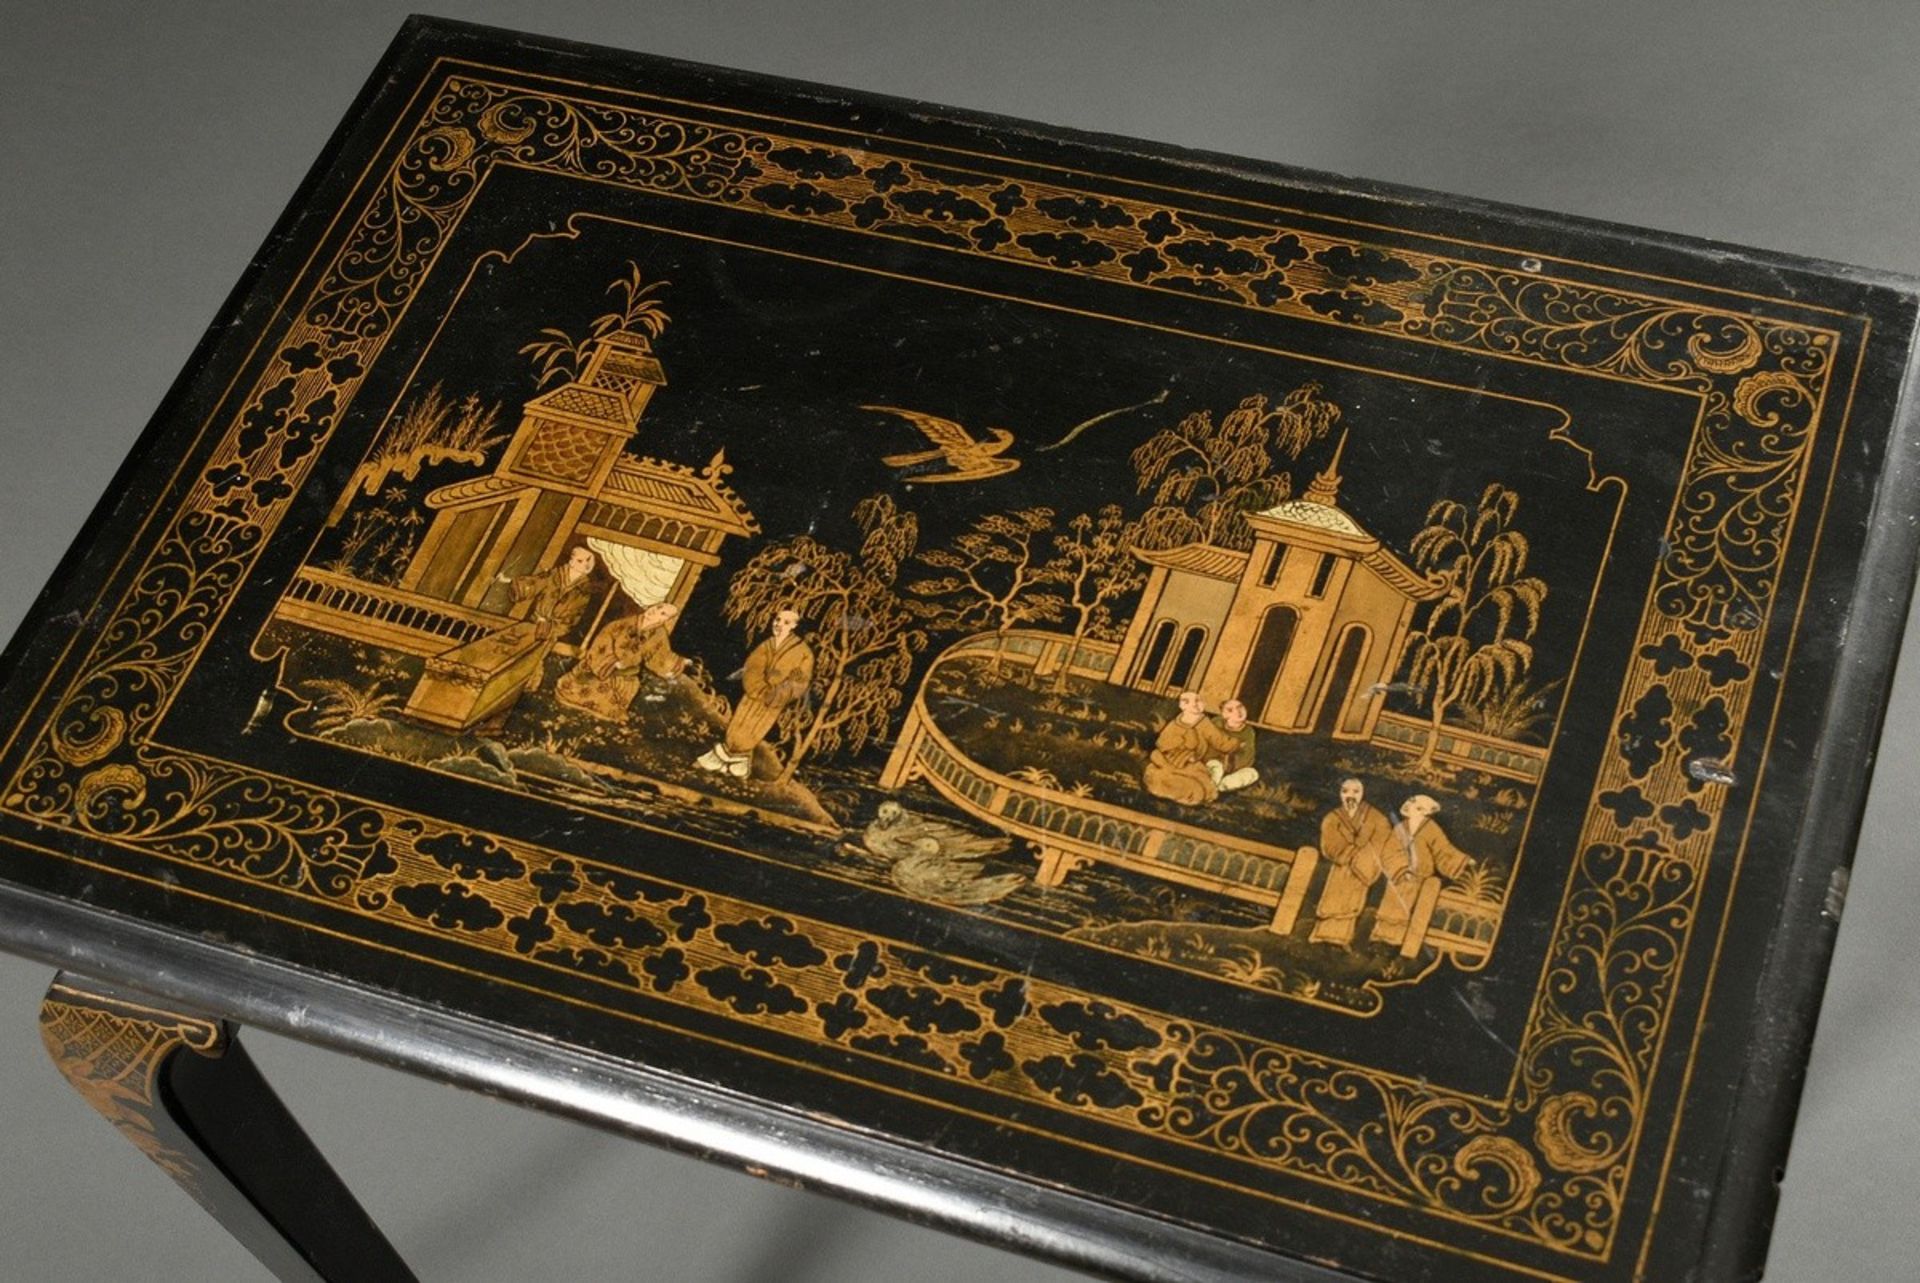 Decorative sewing table with chinoiserie decoration on a black background in lacquer painting, larg - Image 3 of 7